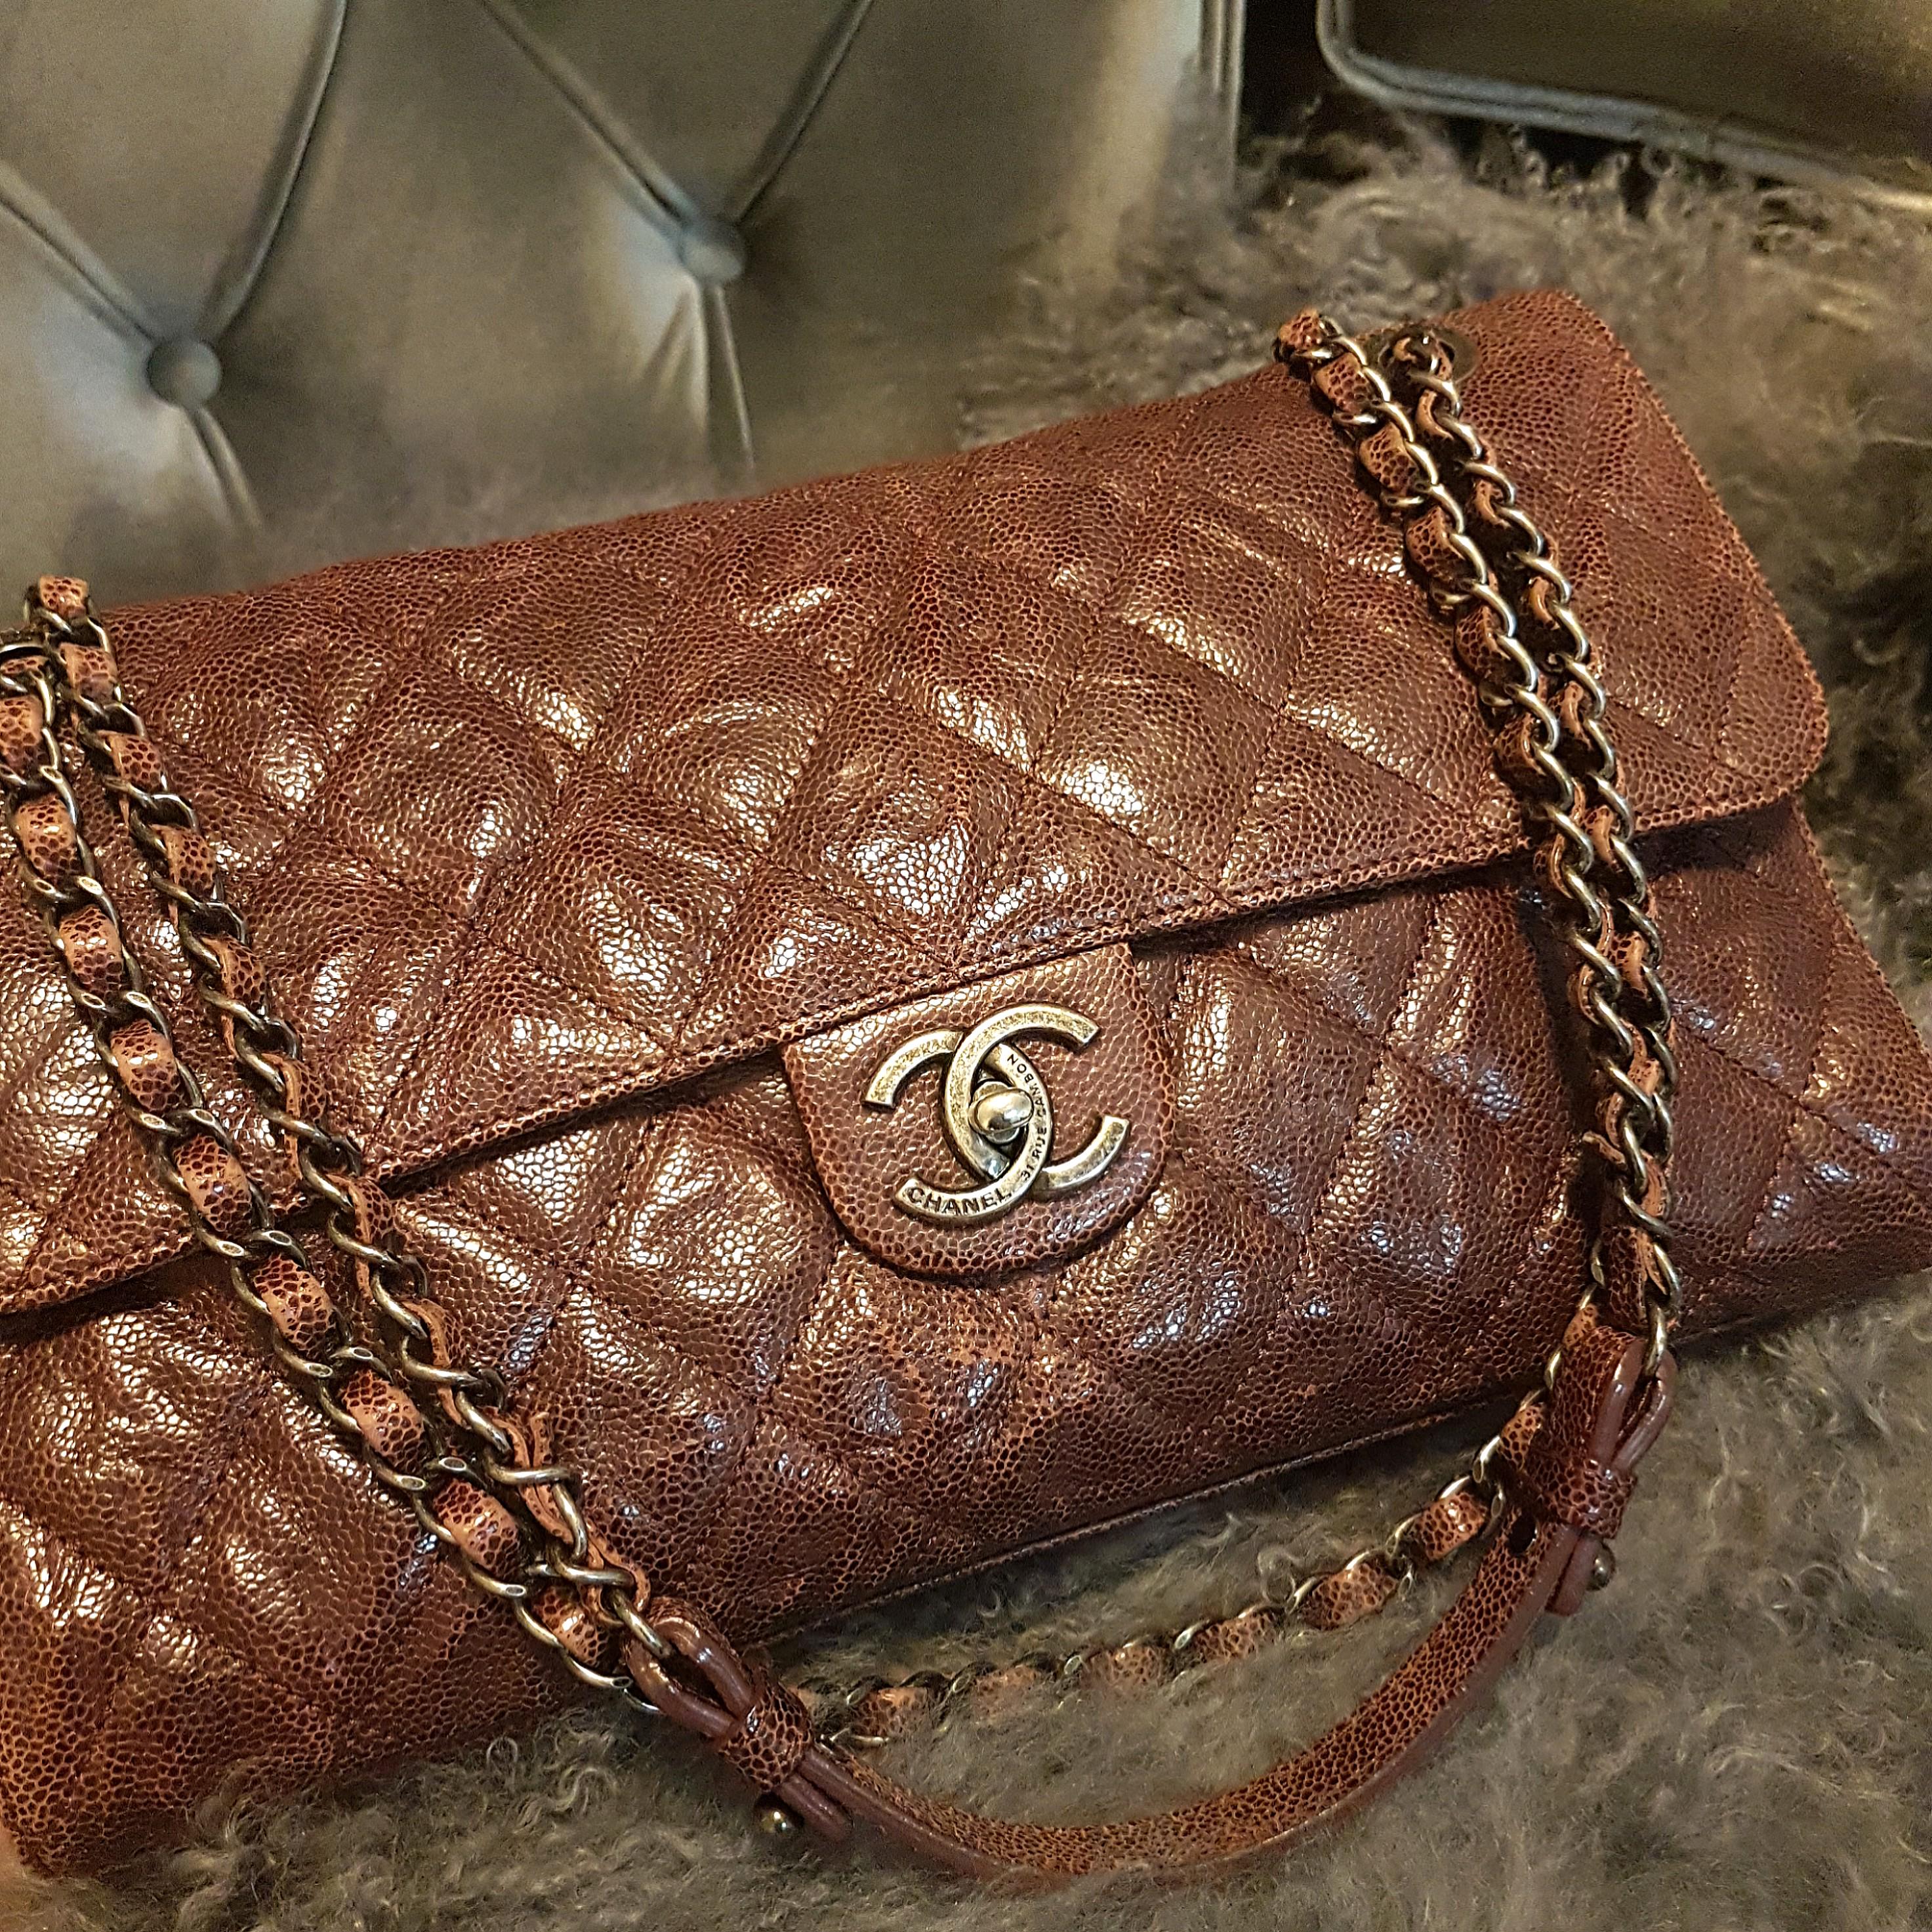 Chanel CC Crave Flap Bag Quilted Glazed Caviar Jumbo Brown